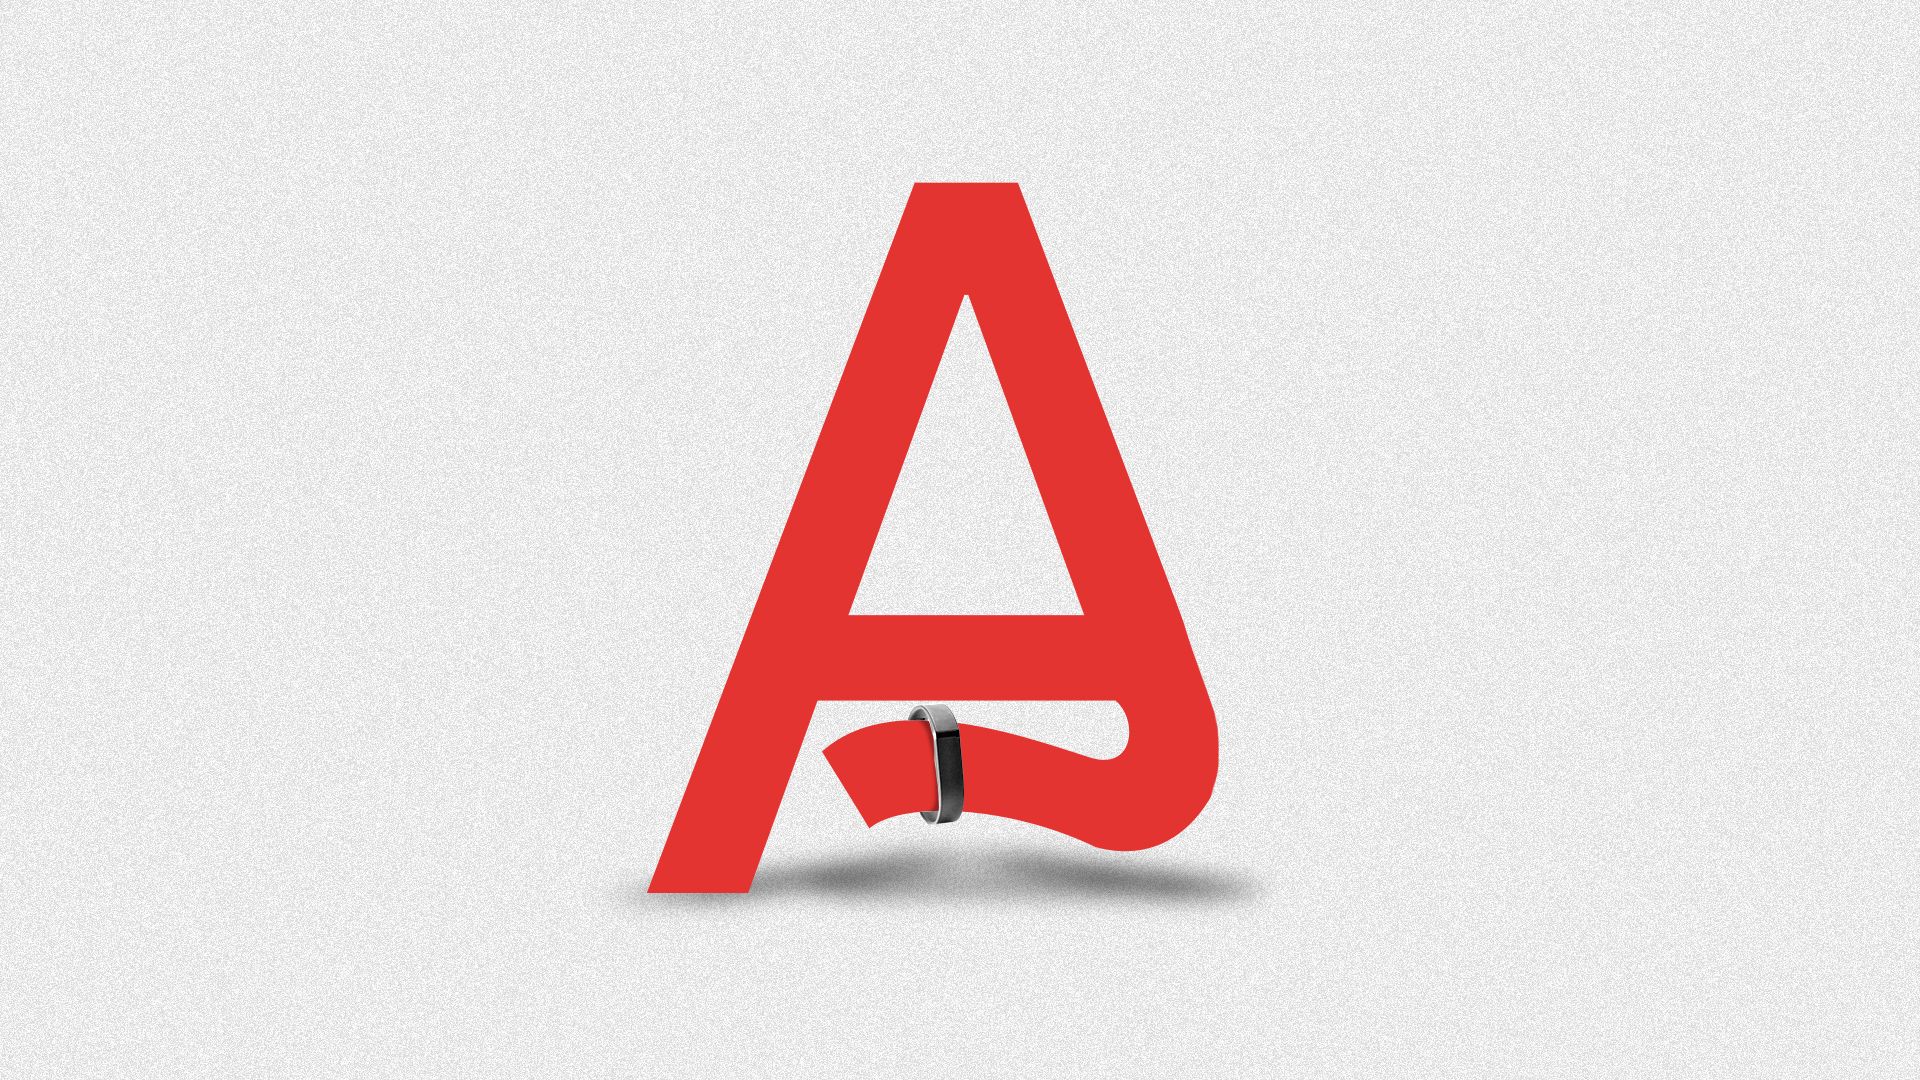 Illustration of the A from the Alphabet logo, the right-side diagonal stroke of the letter A has a Fitbit on it and is being held up as if the A is looking at it.